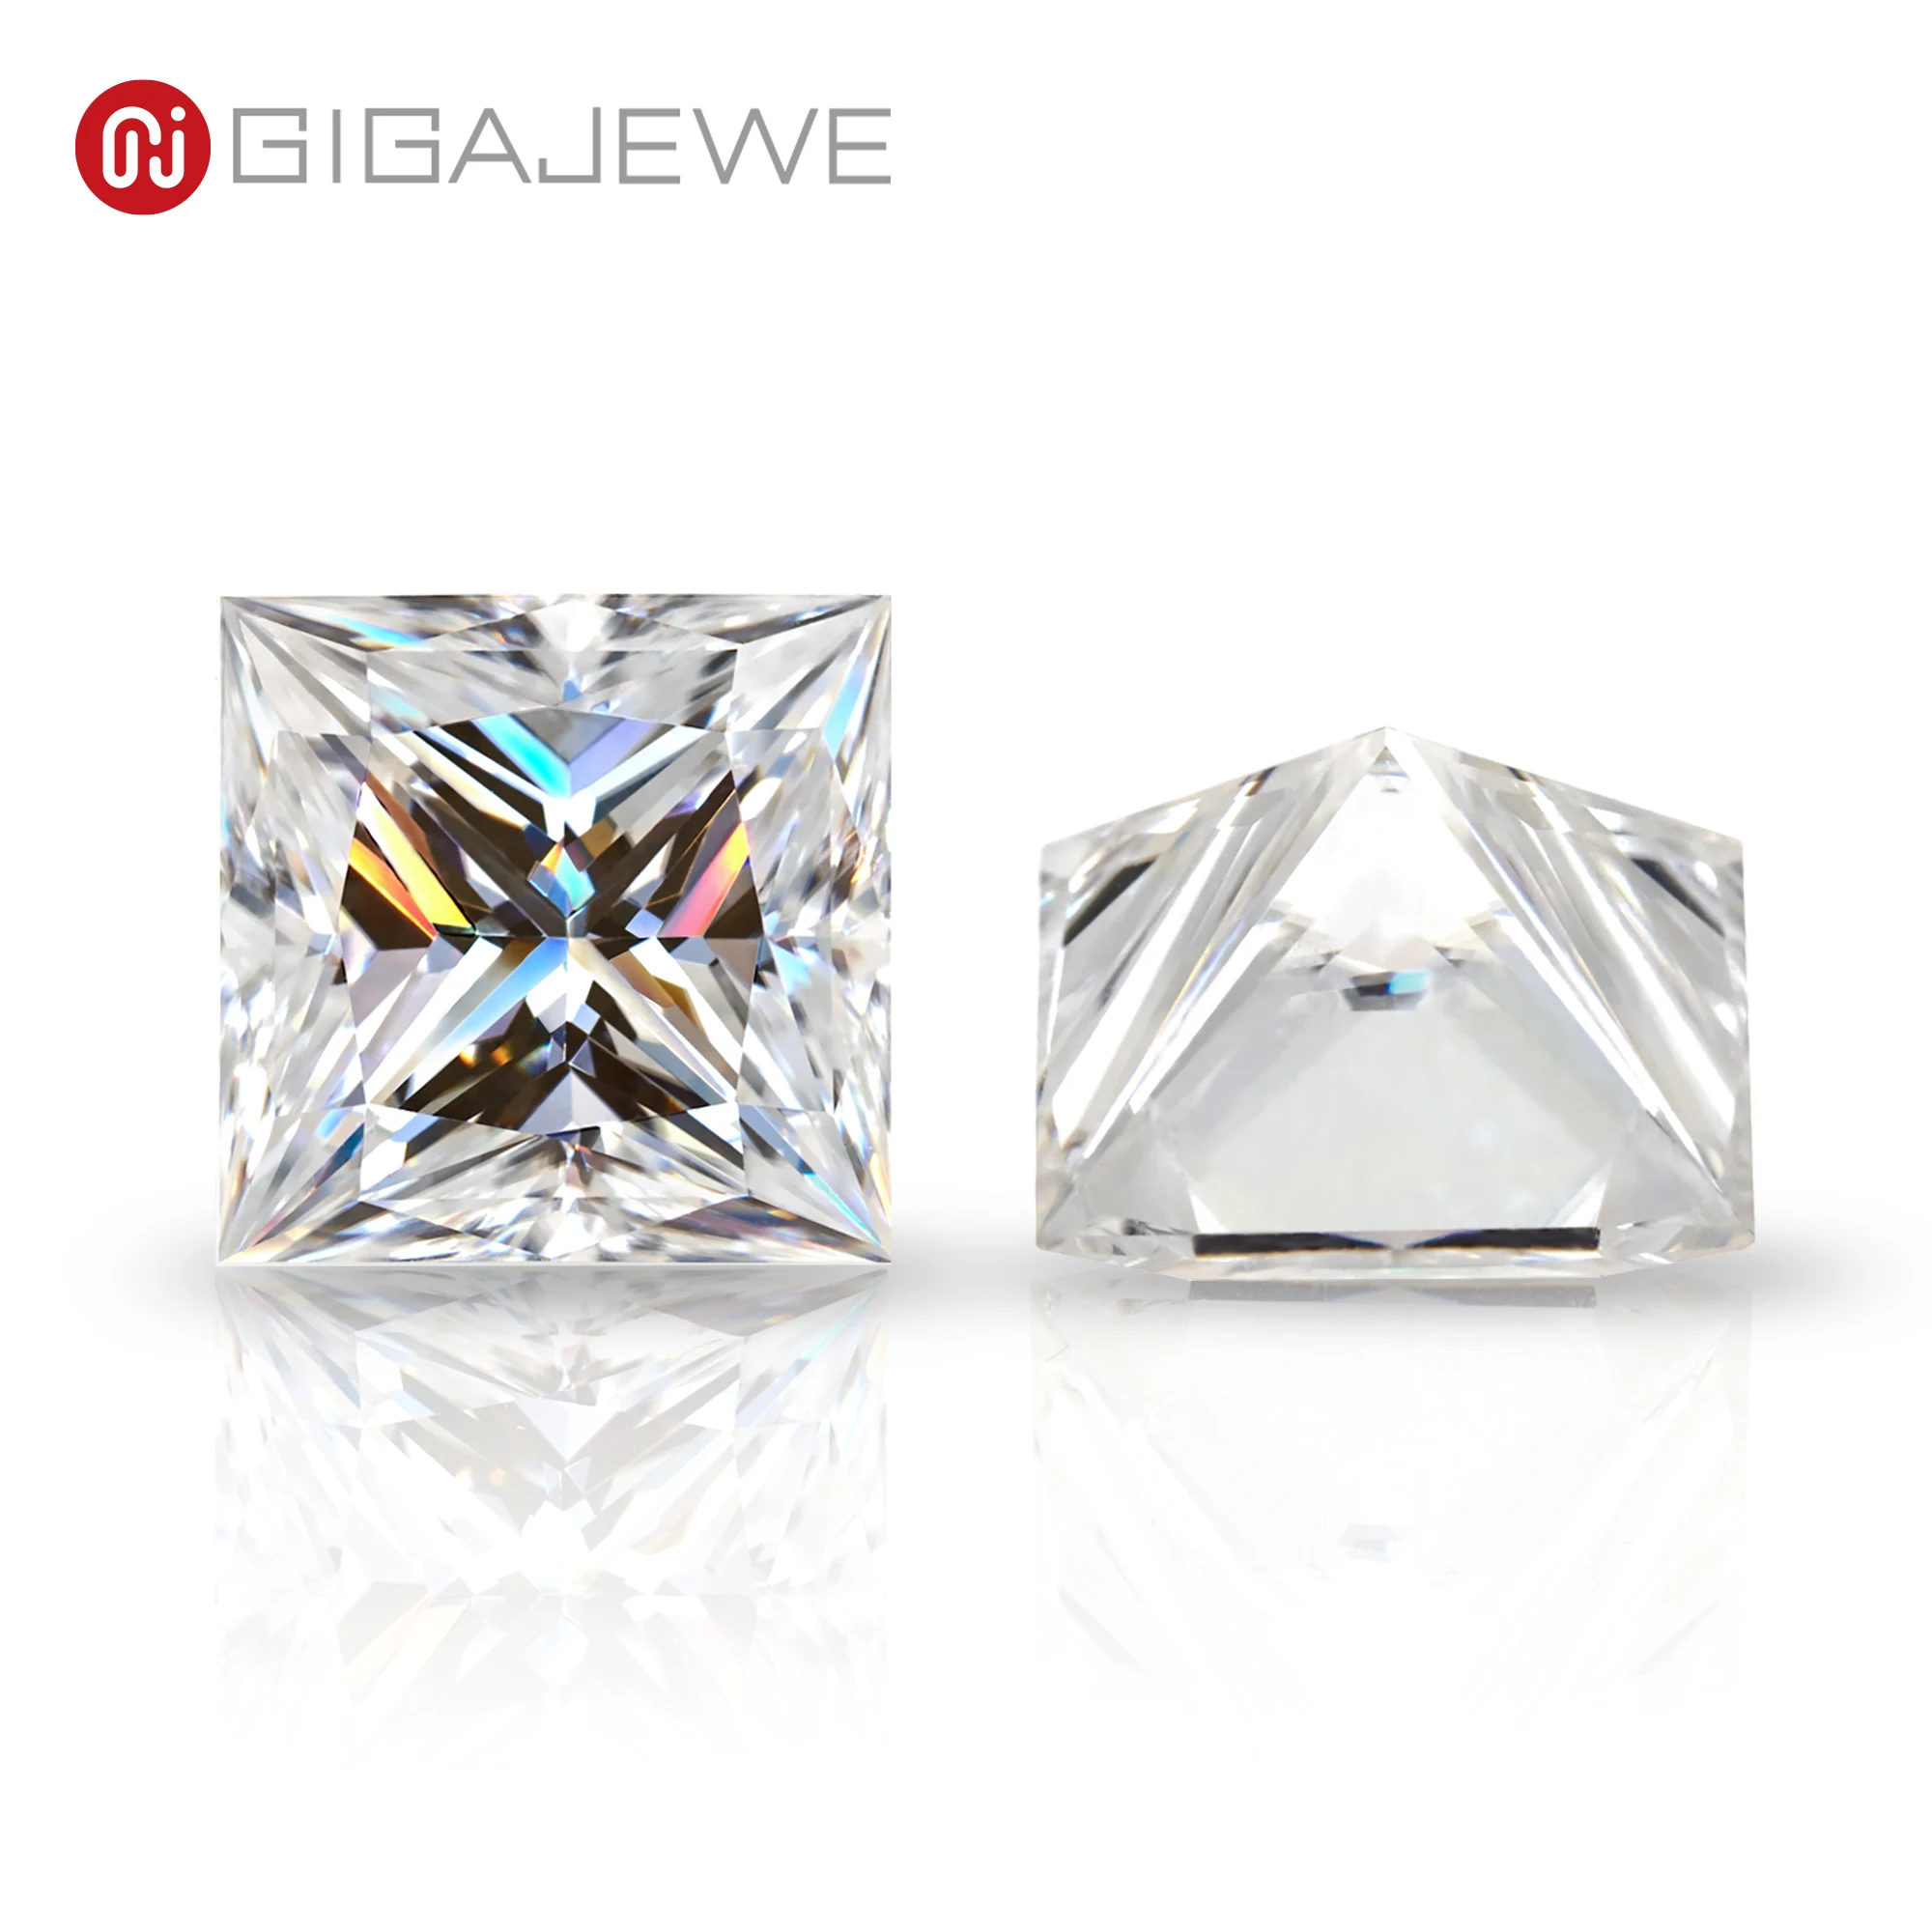 GIGAJEWE Moissanite White D Top Color 0.5-6.0ct Princess Automatic Cut Loose Diamond Test Passed Gemstone For DIY Jewelry Making